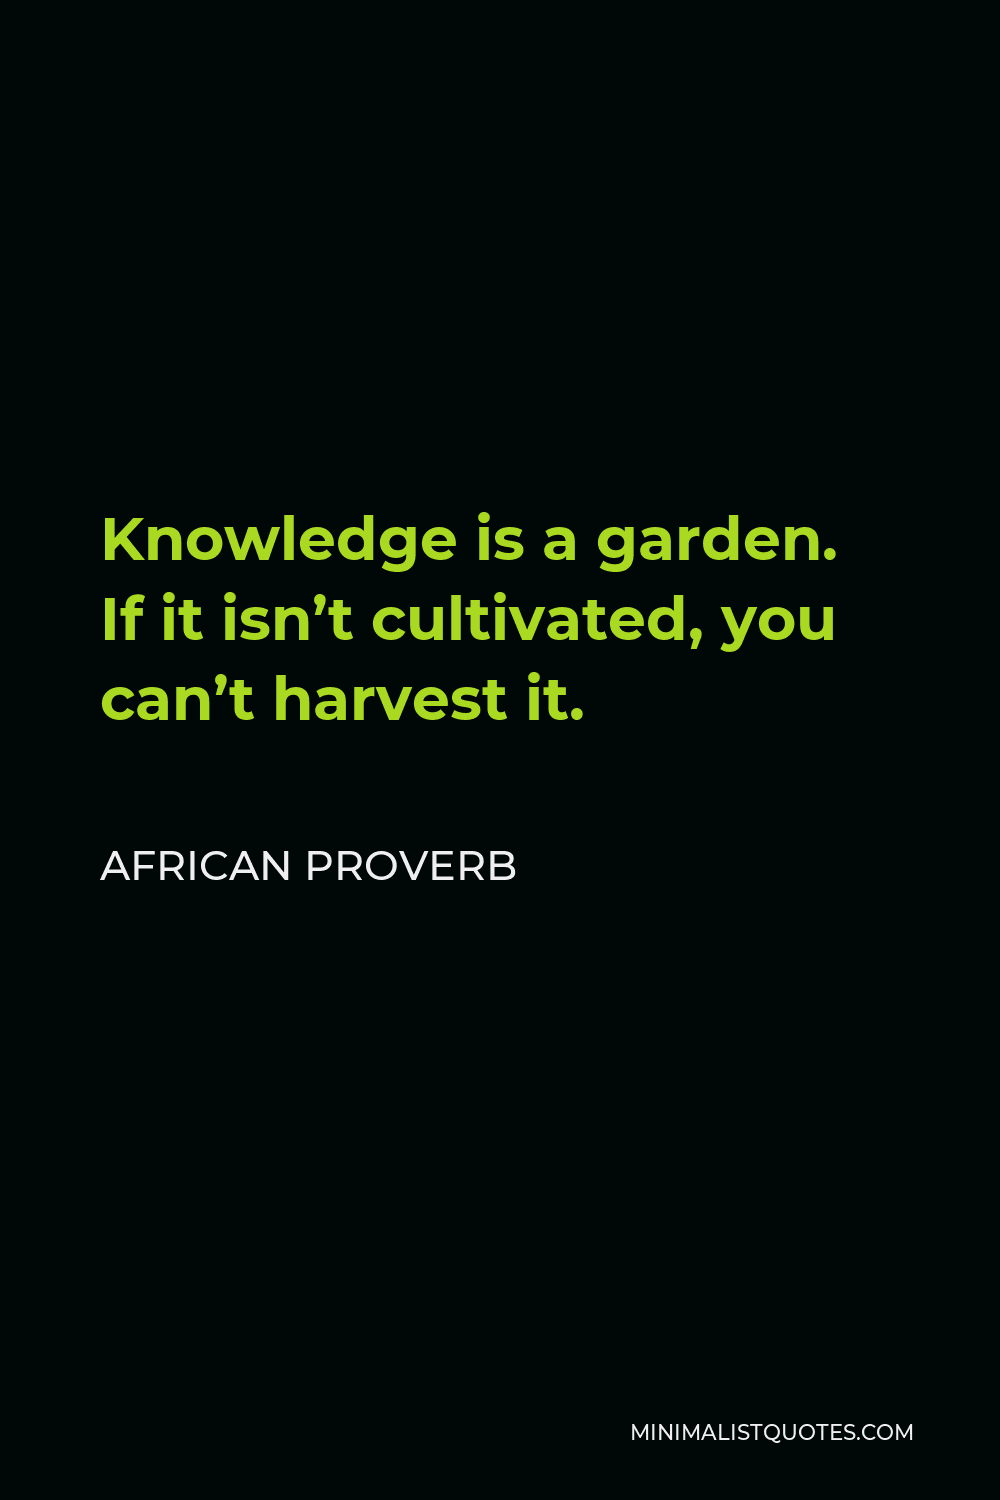 African Proverb Quote - Knowledge is a garden. If it isn’t cultivated, you can’t harvest it.